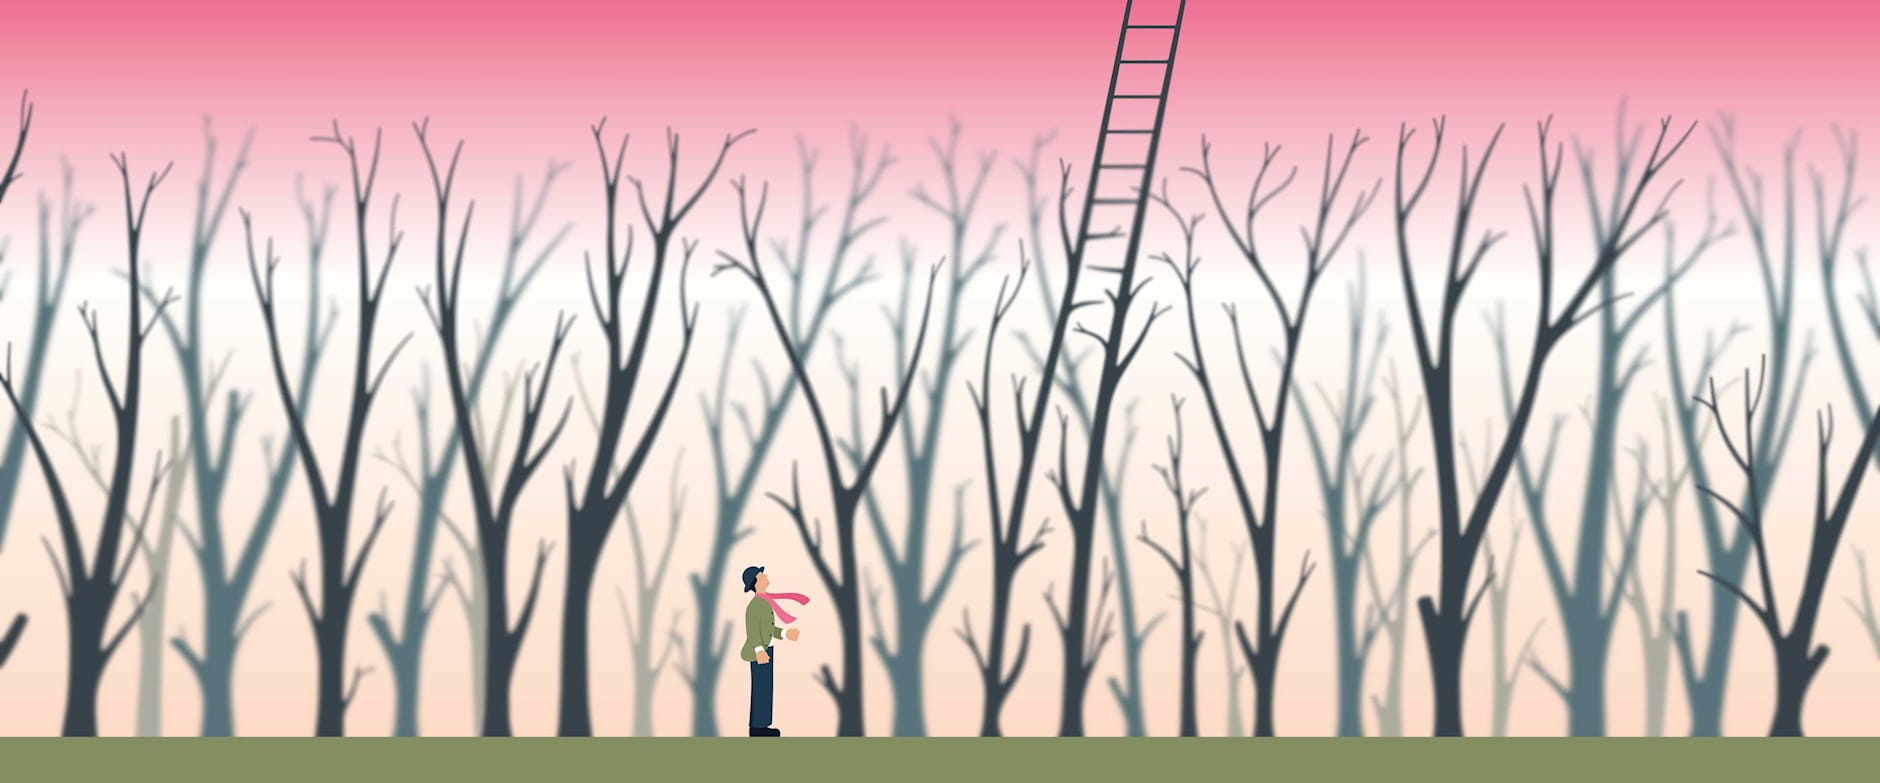 Illustration of a man looking at trees turning into a ladder